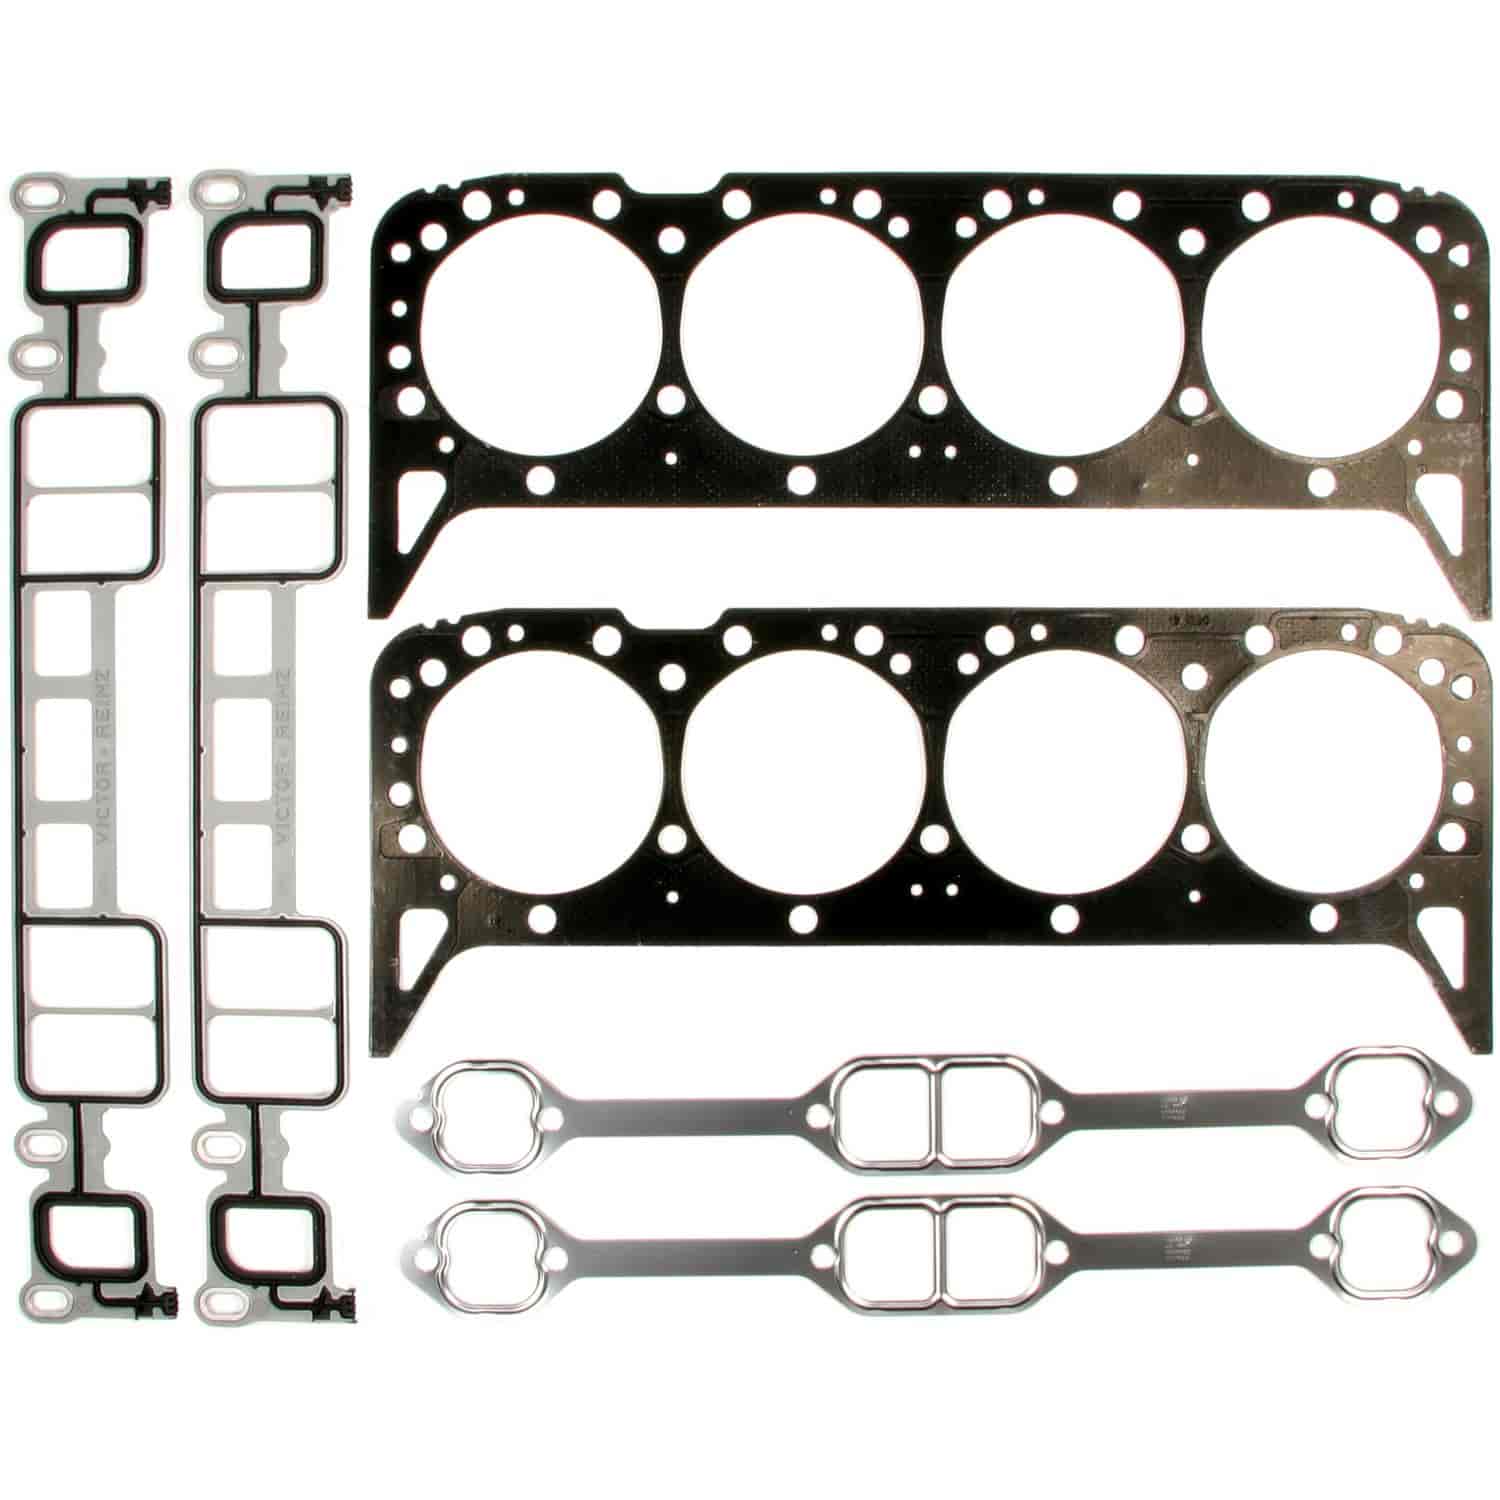 Head Gasket Set for 1996-2002 Chevy/GMC Truck Models Small Block Chevy Vortec 350 ci (5.7L)